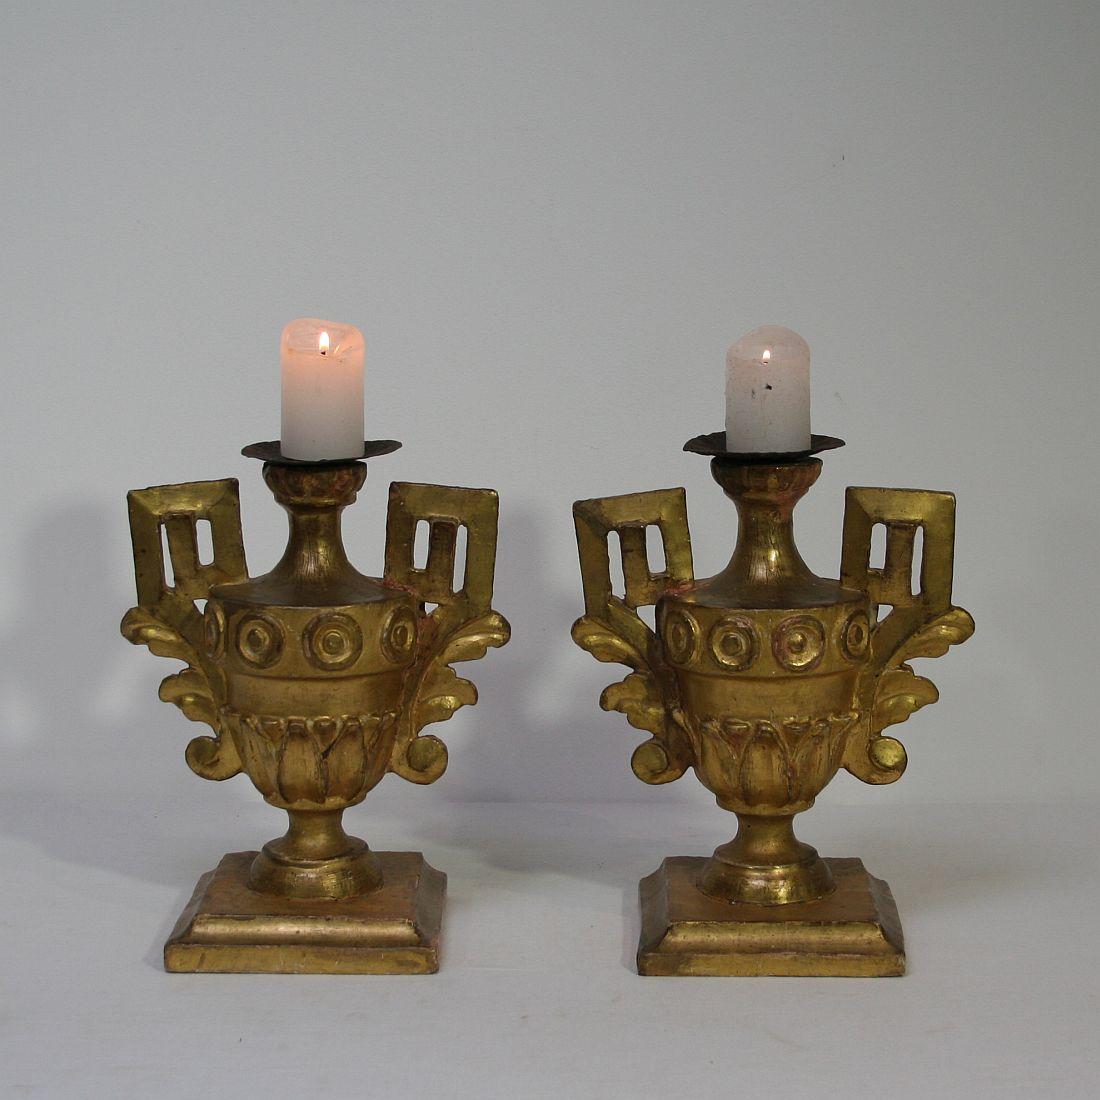 Unique pair of small neoclassical candlesticks with their original gilding, Italy, circa 1780-1800.
Weathered, small losses and old repairs.